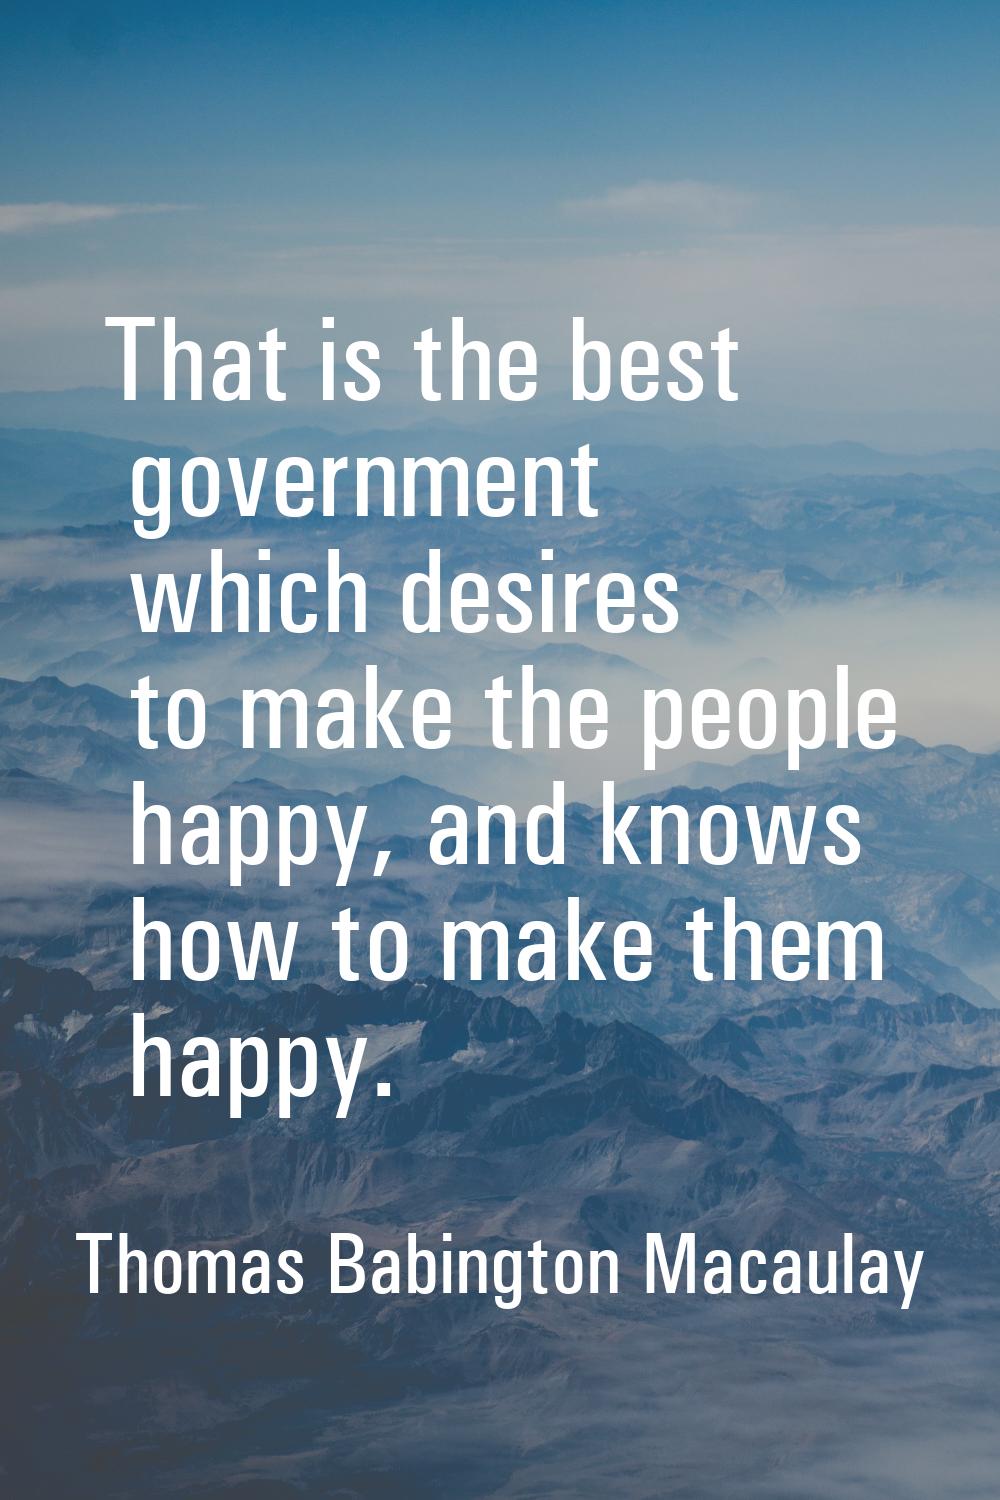 That is the best government which desires to make the people happy, and knows how to make them happ